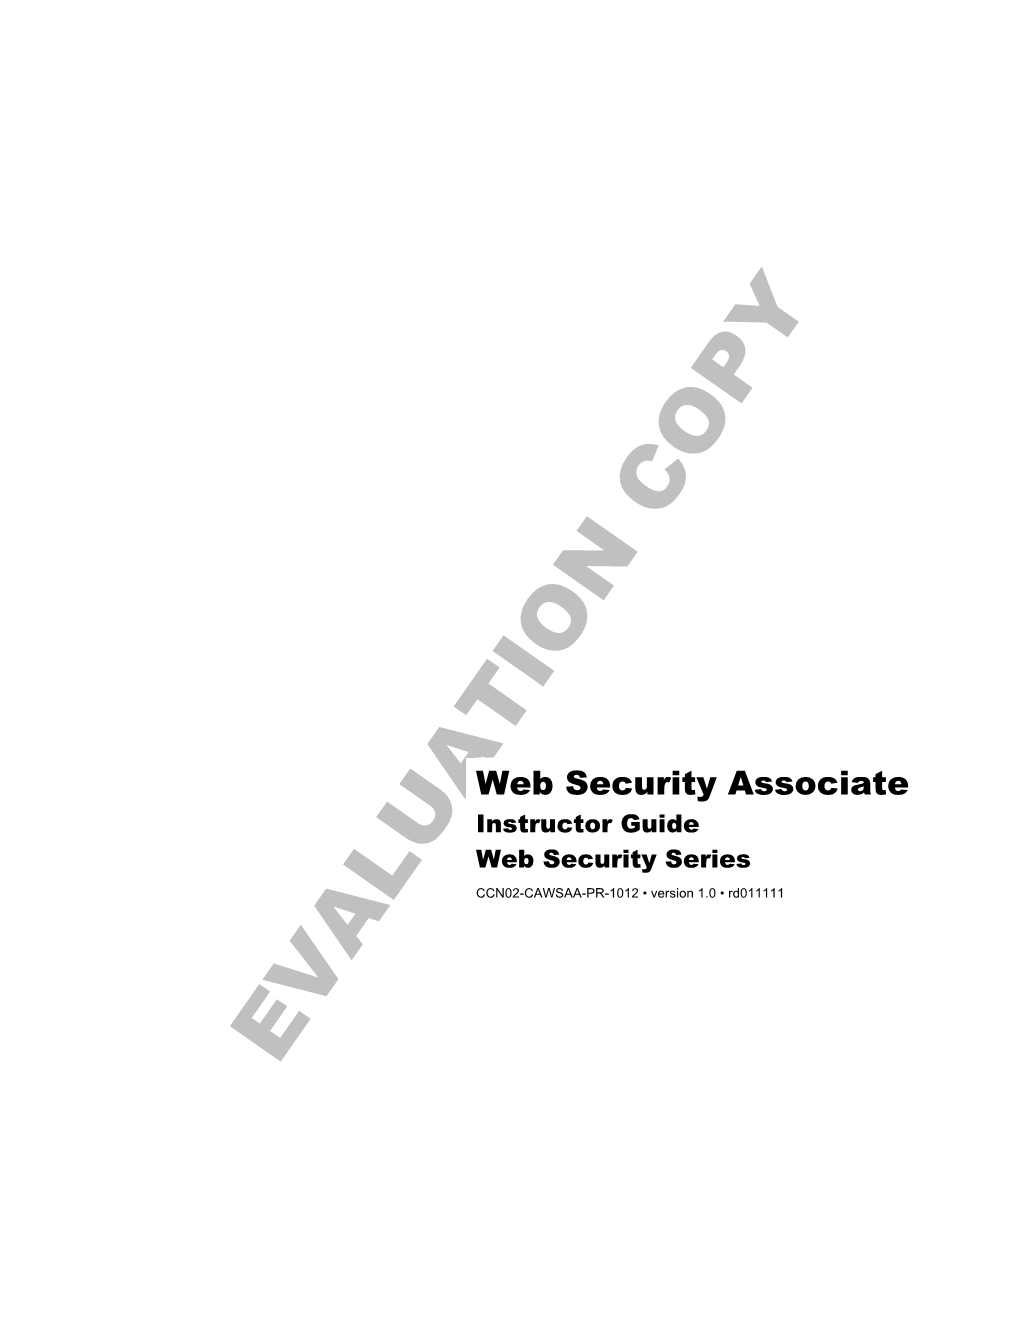 Web Security Associate Instructor Guide Web Security Series